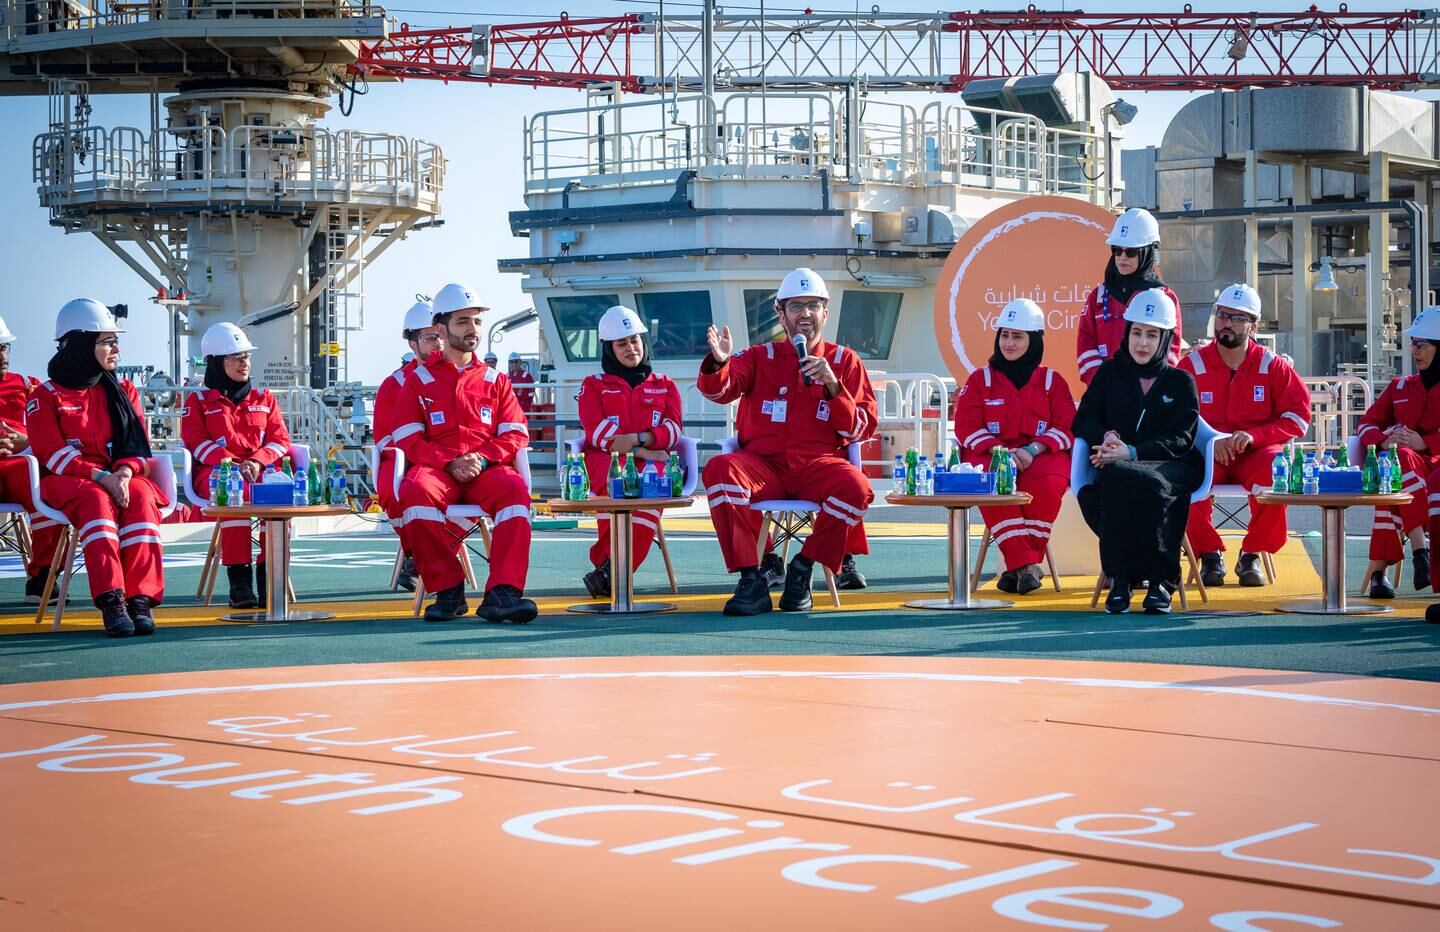 Abu Dhabi, UAE – February  29, 2020: The Abu Dhabi National Oil Company (ADNOC) recently hosted a ‘Youth Circle’ at its Umm Lulu offshore platform – one of the world’s largest offshore platforms –  as it focuses on the future and continues to invest in the development of Emirati youths to build long-term resilience and ensure ADNOC remains an integral part of the UAE’s economy.  Held under the theme “The Role of UAE Youths in Driving Sustainable Business,” the Youth Circle examined ways UAE youths can develop their leadership skills to strengthen their contribution to the delivery of ADNOC’s 2030 strategy. It also reviewed opportunities for youth professional development and ways to encourage Emirati youths to work in remote sites to give them practical experience as they develop their leadership skills.  The event, the first in ADNOC’s series of Youth Circles for this year, was organized by ADNOC’s Youth Council and hosted by His Excellency Dr. Sultan Ahmed Al Jaber, UAE Minister of State and ADNOC Group CEO, with H.E. Shamma bint Suhail Faris Al Mazrui, UAE Minister of State for Youth Affairs, and H.E. Saeed Al Nazari, Director General of Federal Youth Authority, attending.     Addressing the Youth Circle, H.E. Dr. Al Jaber said: “ADNOC is proud to play a leading role in developing and empowering the next generation of highly skilled and talented Emirati youths who will be the driving force of ADNOC and the UAE’s future success. We are pleased that many of our youths are managing key projects across our offices and sites, and actively contributing to our strong operational and financial performance. Courtesy Adnoc